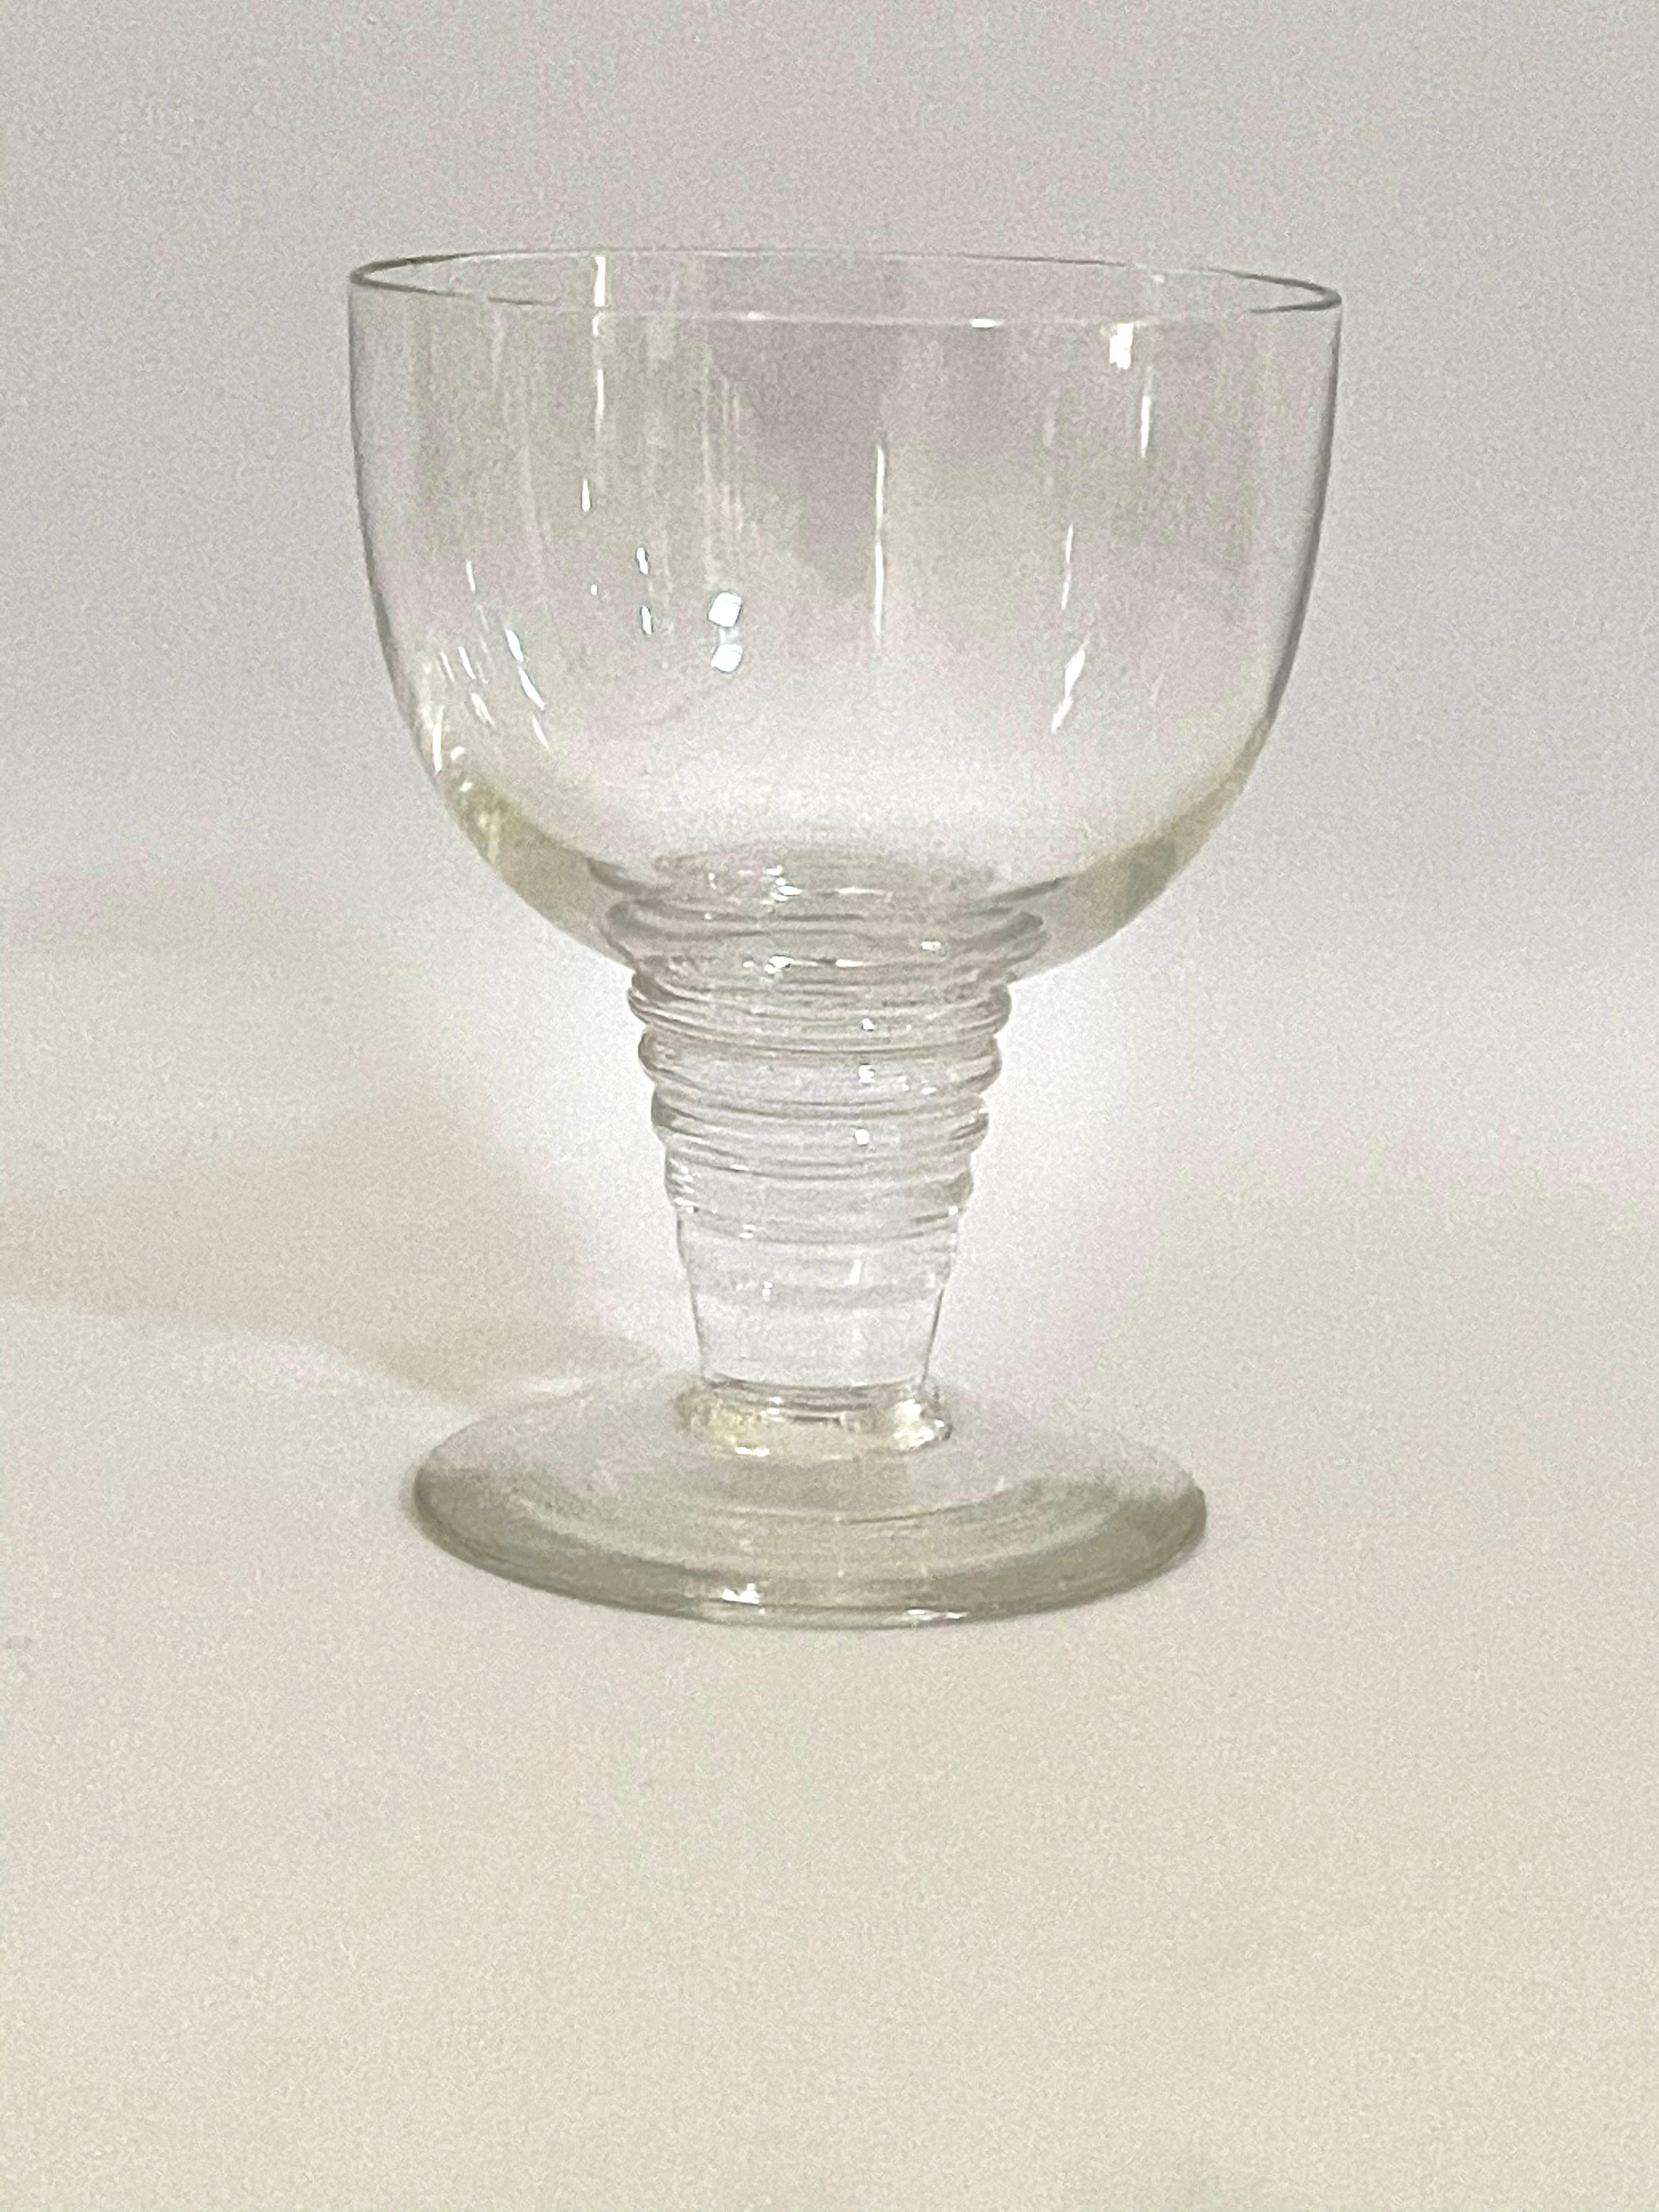 Set of 8 (eight) wine glasses made by René Lalique in 1937. Model is named 